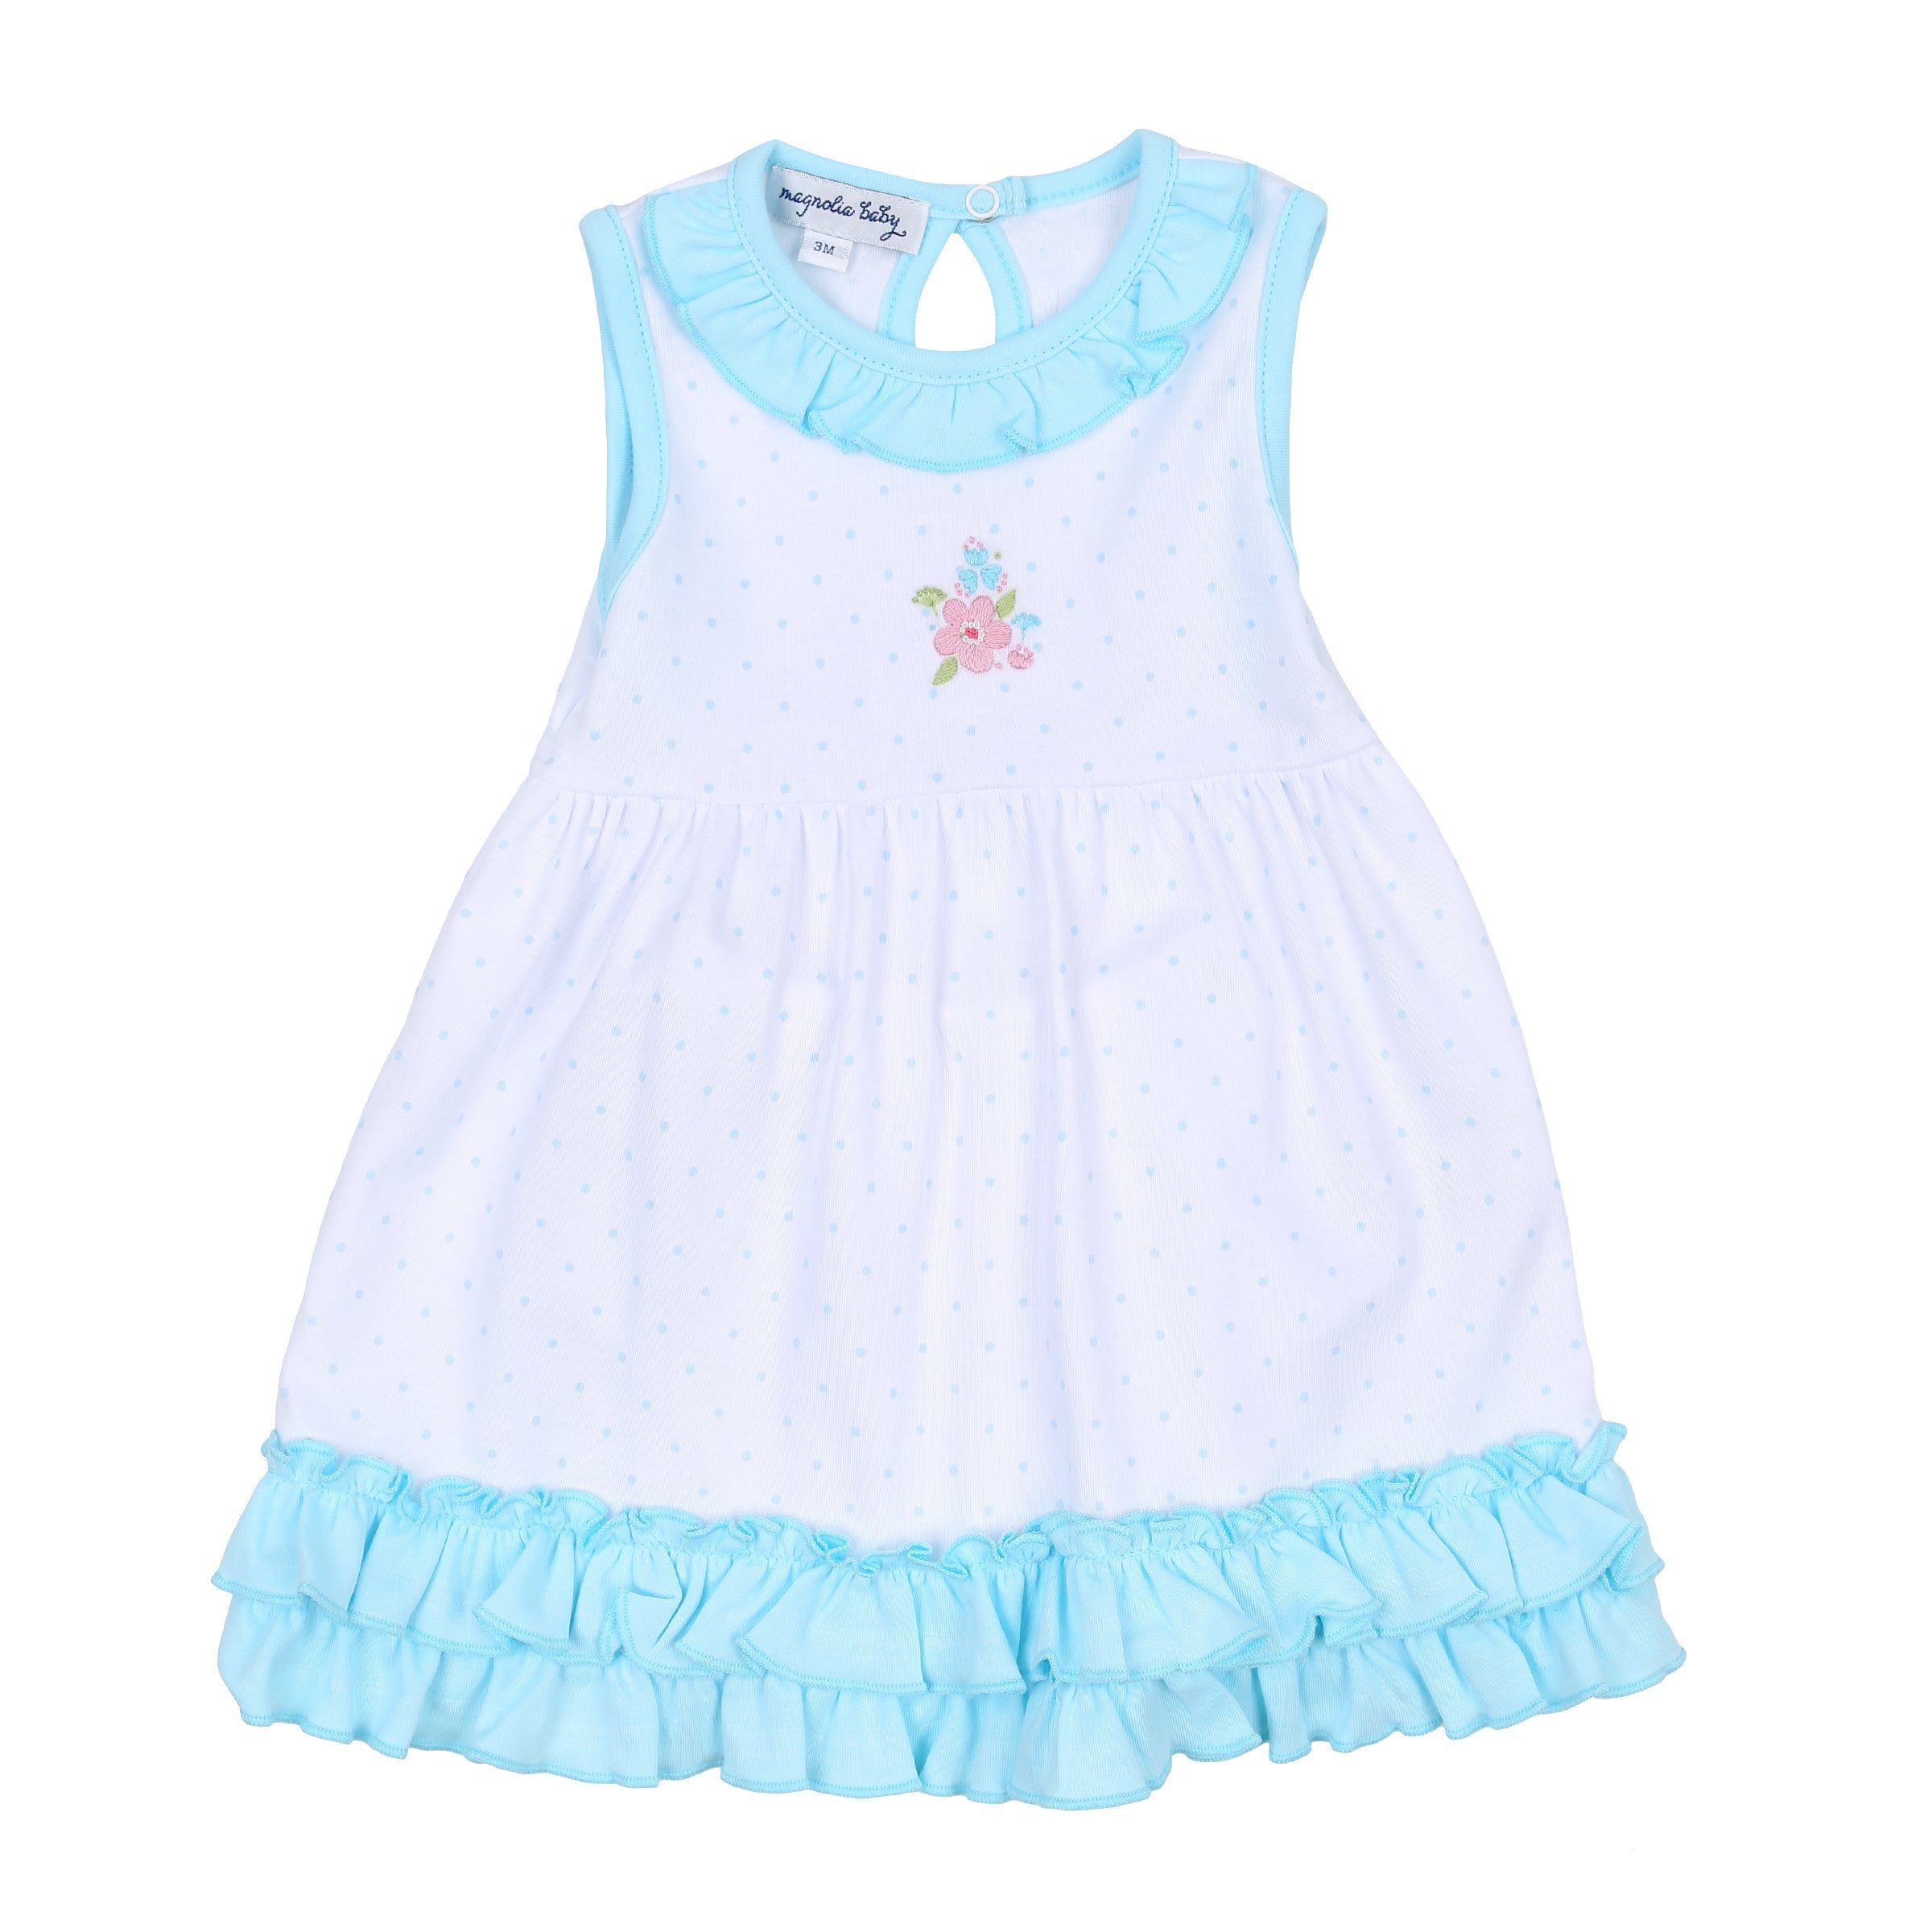 Natalie's Classics Embroidered Toddler Dress